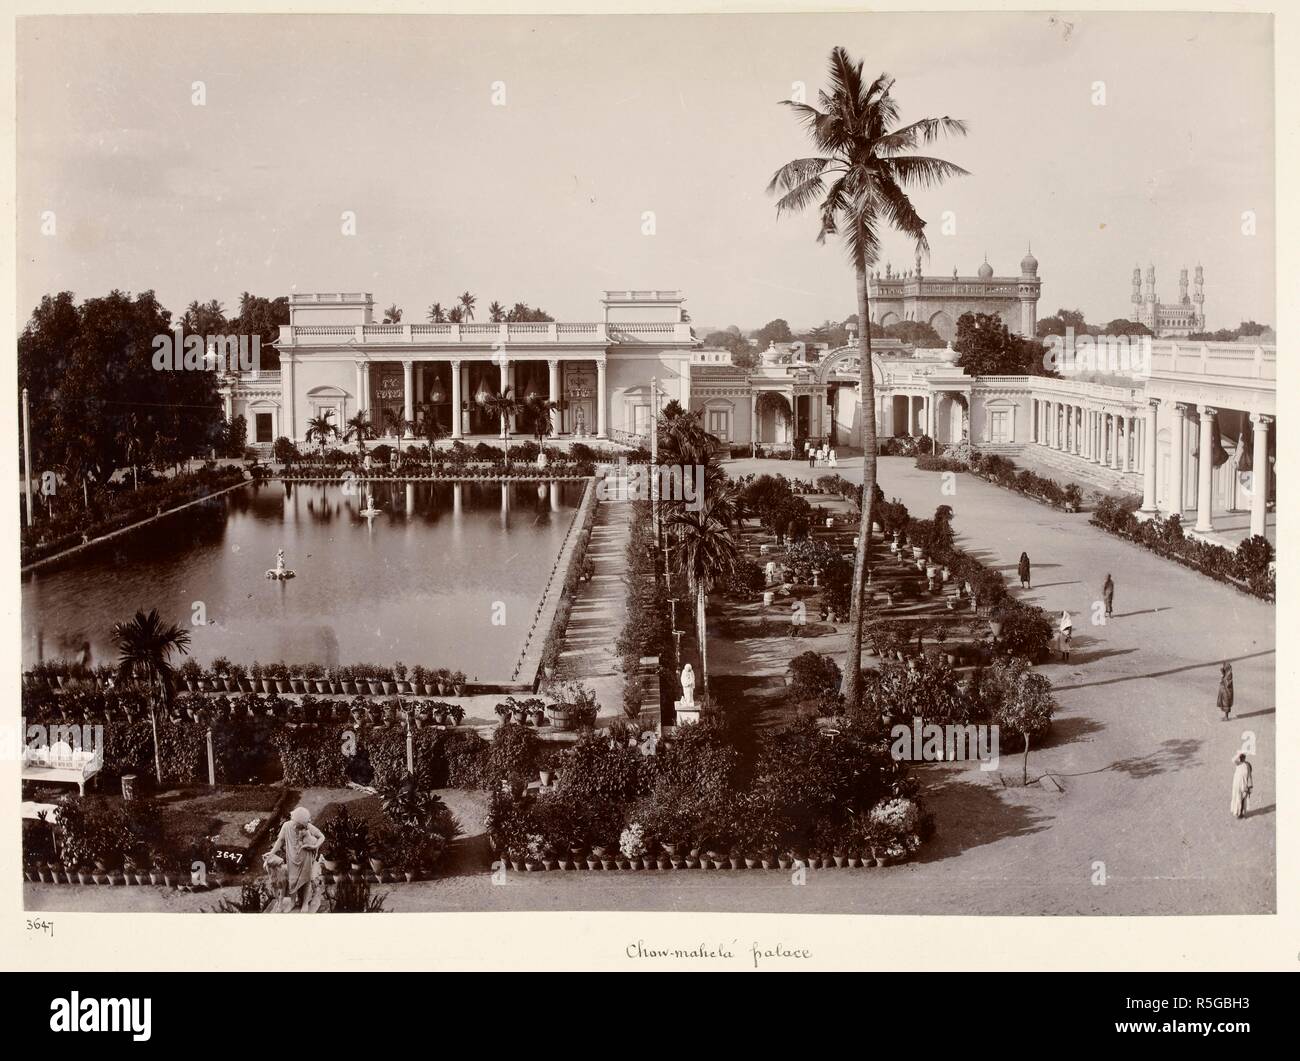 Chow-mahela palace [Hyderabad]. A view looking across the garden and tank towards one of the buildings of the Chaumahalla Palace, with the Char Minar in the right background. Curzon Collection: 'Souvenir of the Visit of H.E. Lord Curzon of Kedleston Viceroy of India to H.H. the Nizam's Dominions April 1902'. c. 1902. Photograph. Source: Photo 430/33(41). Language: English. Author: Dayal, Deen. Stock Photo